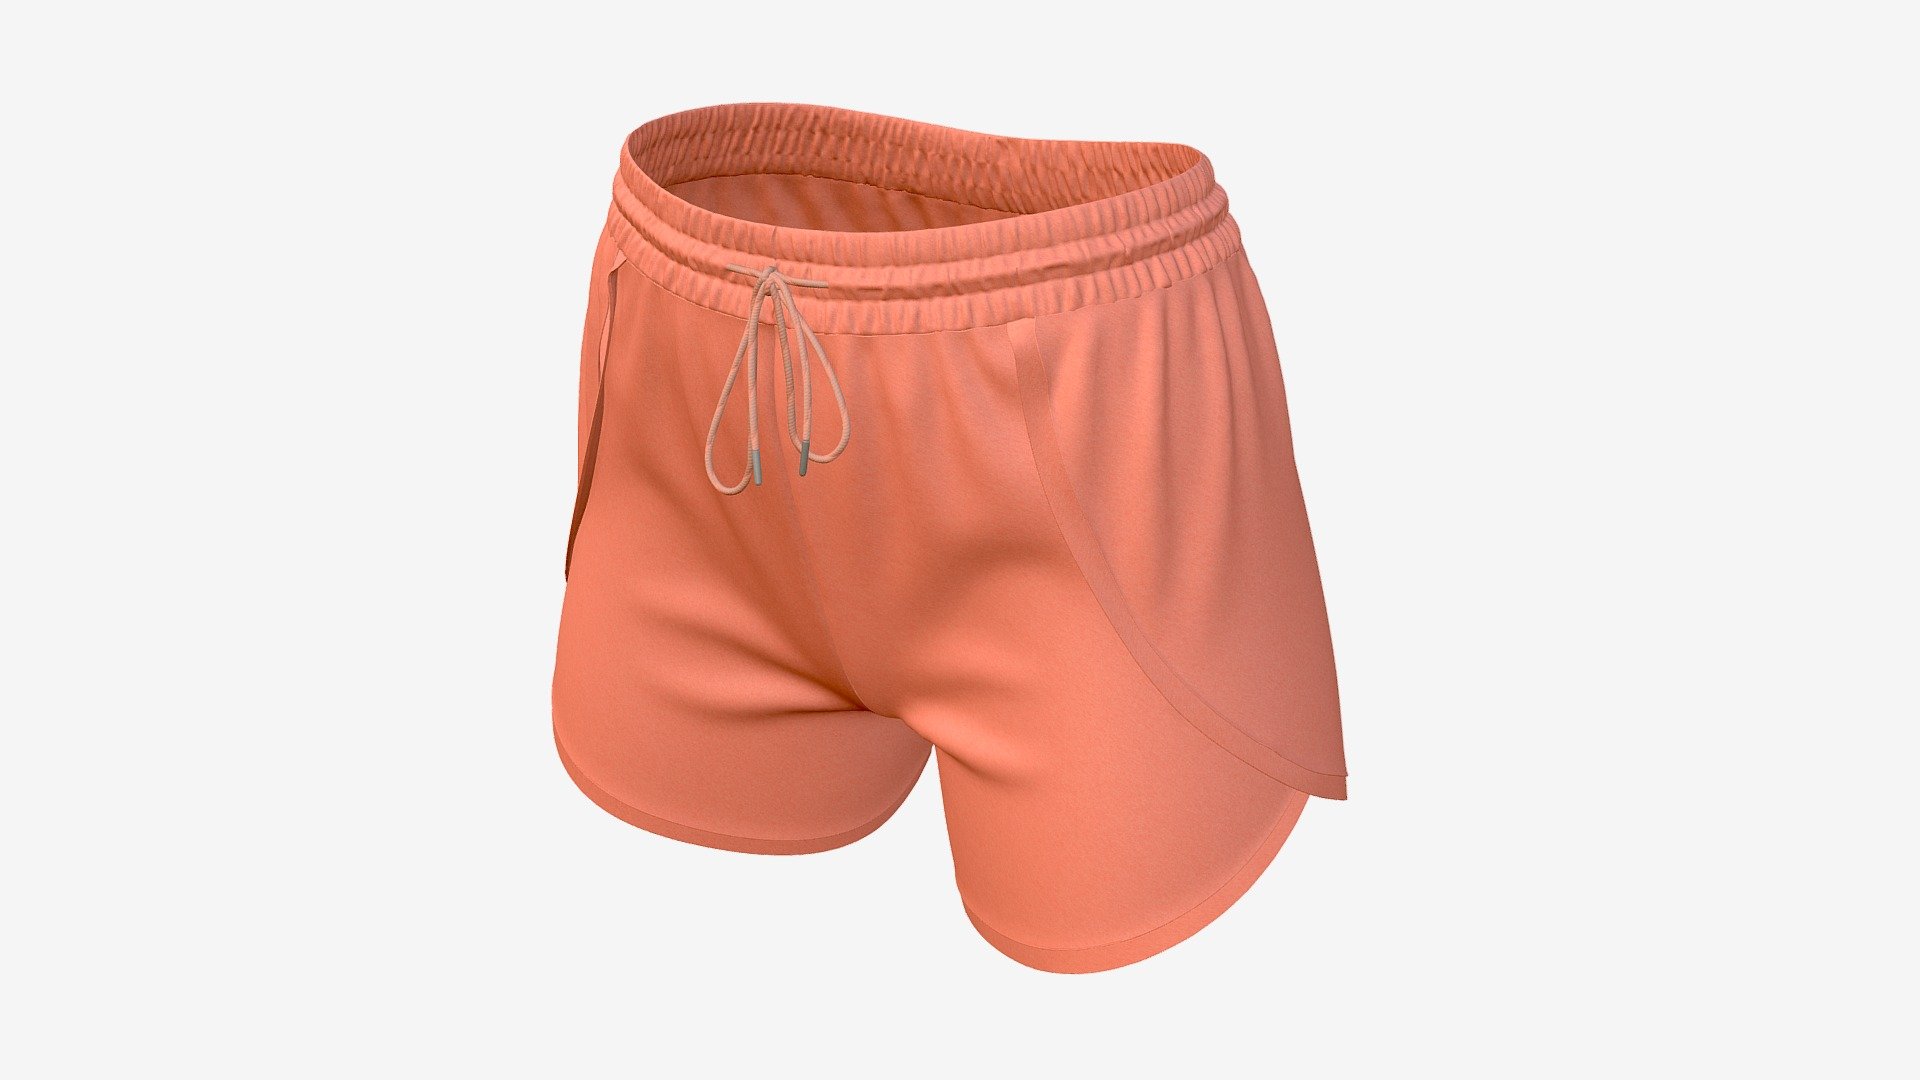 Fitness shorts for women pink - Buy Royalty Free 3D model by HQ3DMOD (@AivisAstics) 3d model